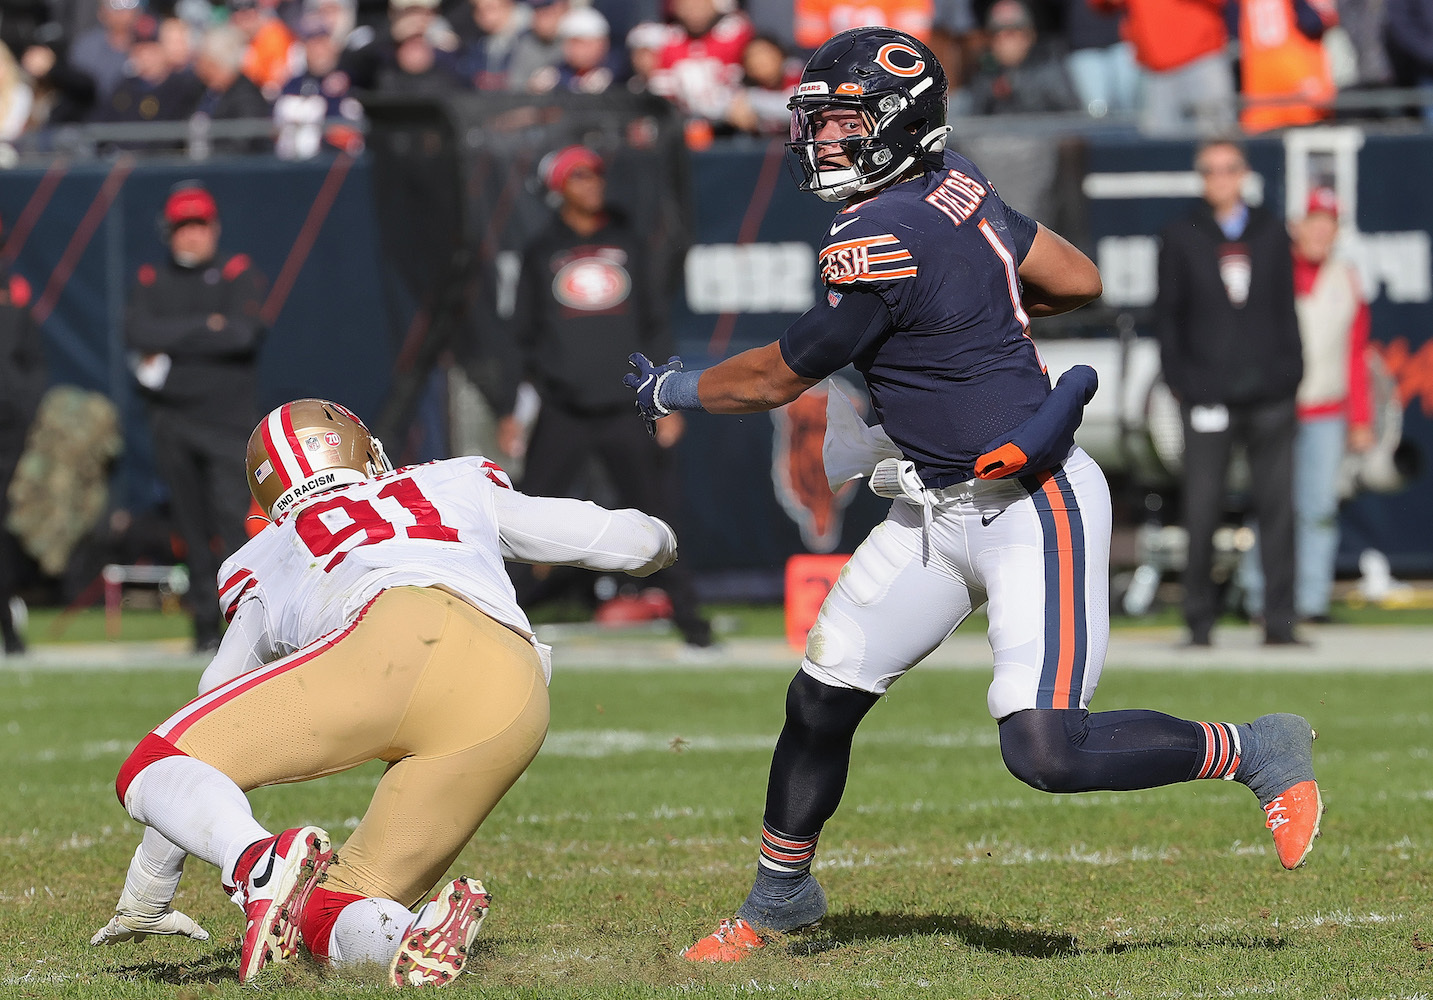 CHICAGO, ILLINOIS - OCTOBER 31: Justin Fields #1 of the Chicago Bears breaks a tackle by Arik Armstead #91 of the San Francisco 49ers at the start of a touchdown run at Soldier Field on October 31, 2021 in Chicago, Illinois. The 49ers defeated the Bears 33-22. (Photo by Jonathan Daniel/Getty Images)